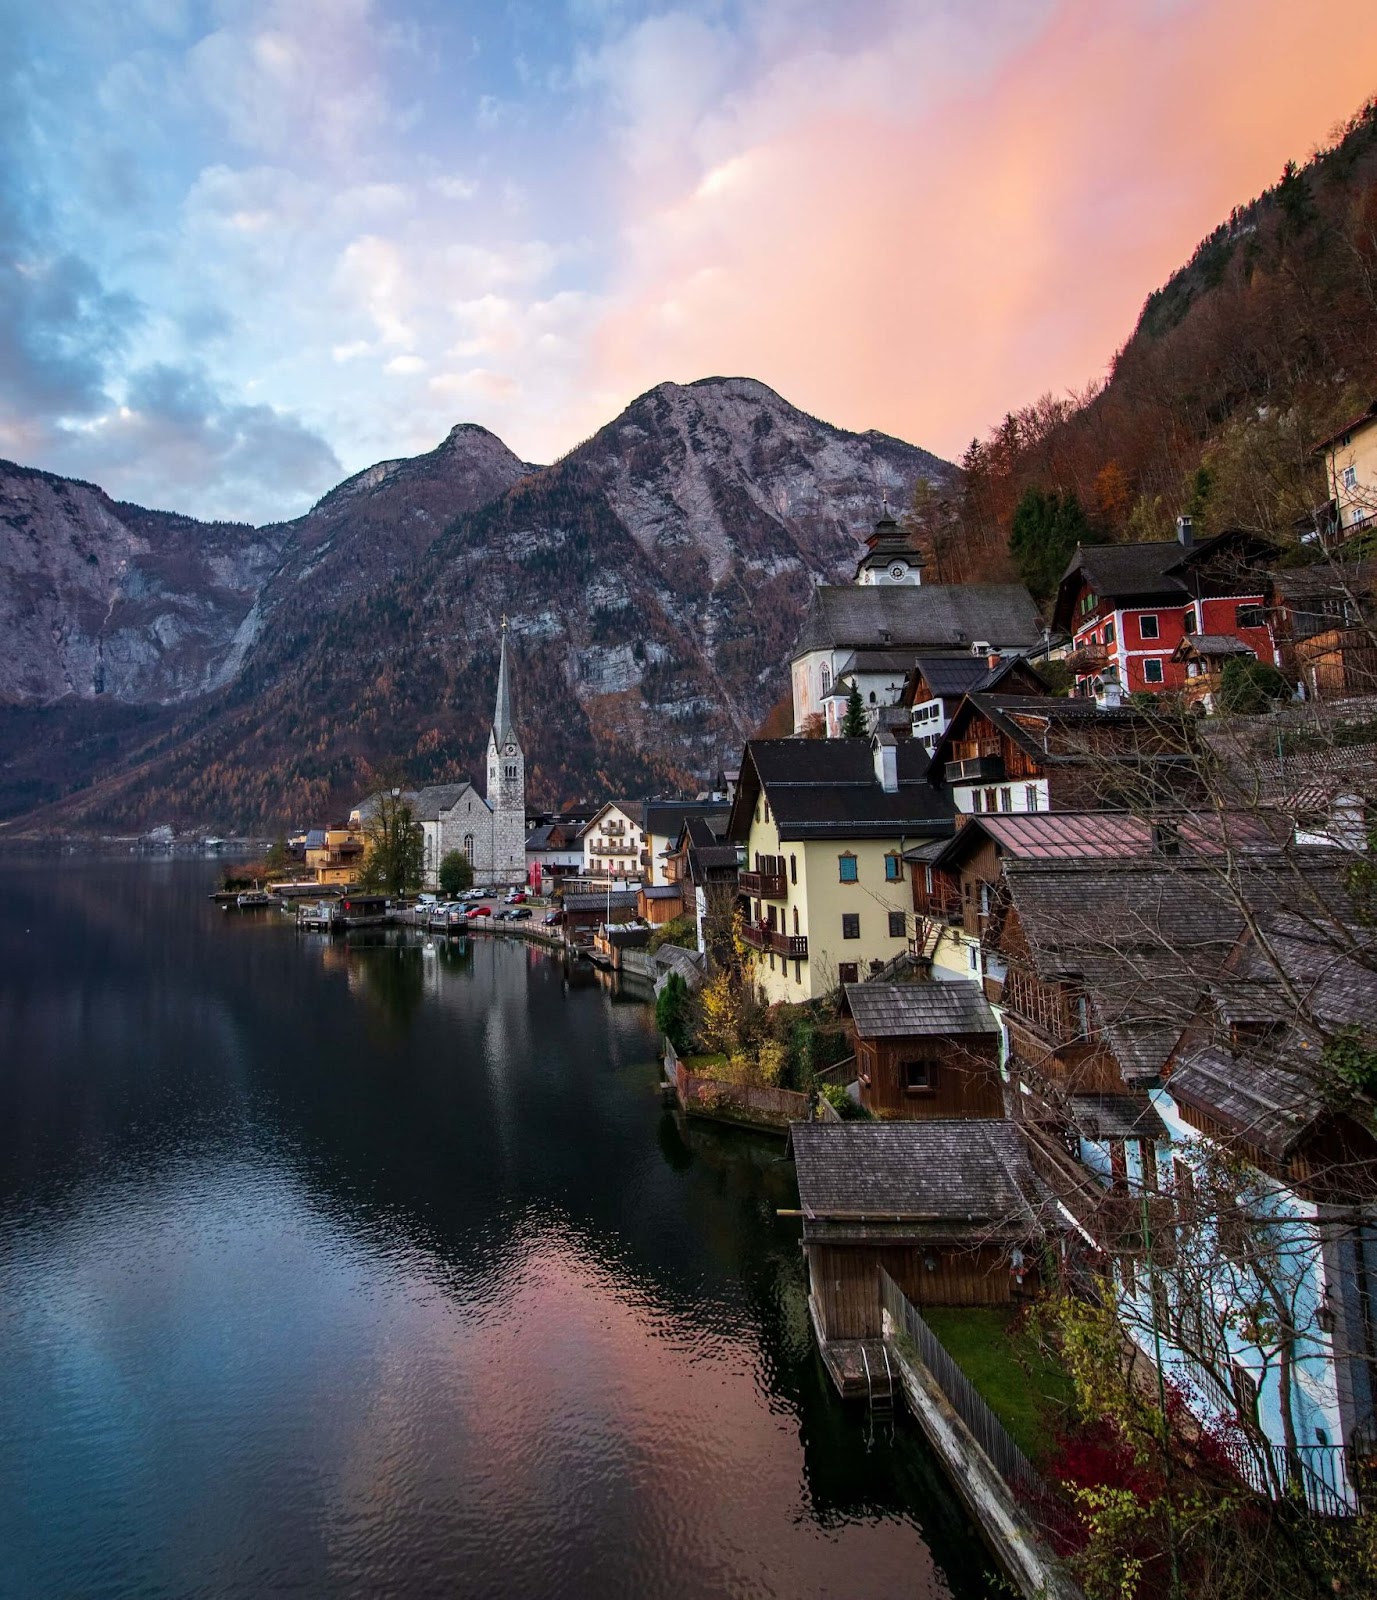 1 day in Vienna, Hallstatt is a UNESCO World Heritage Site that is famous for its beautiful scenery